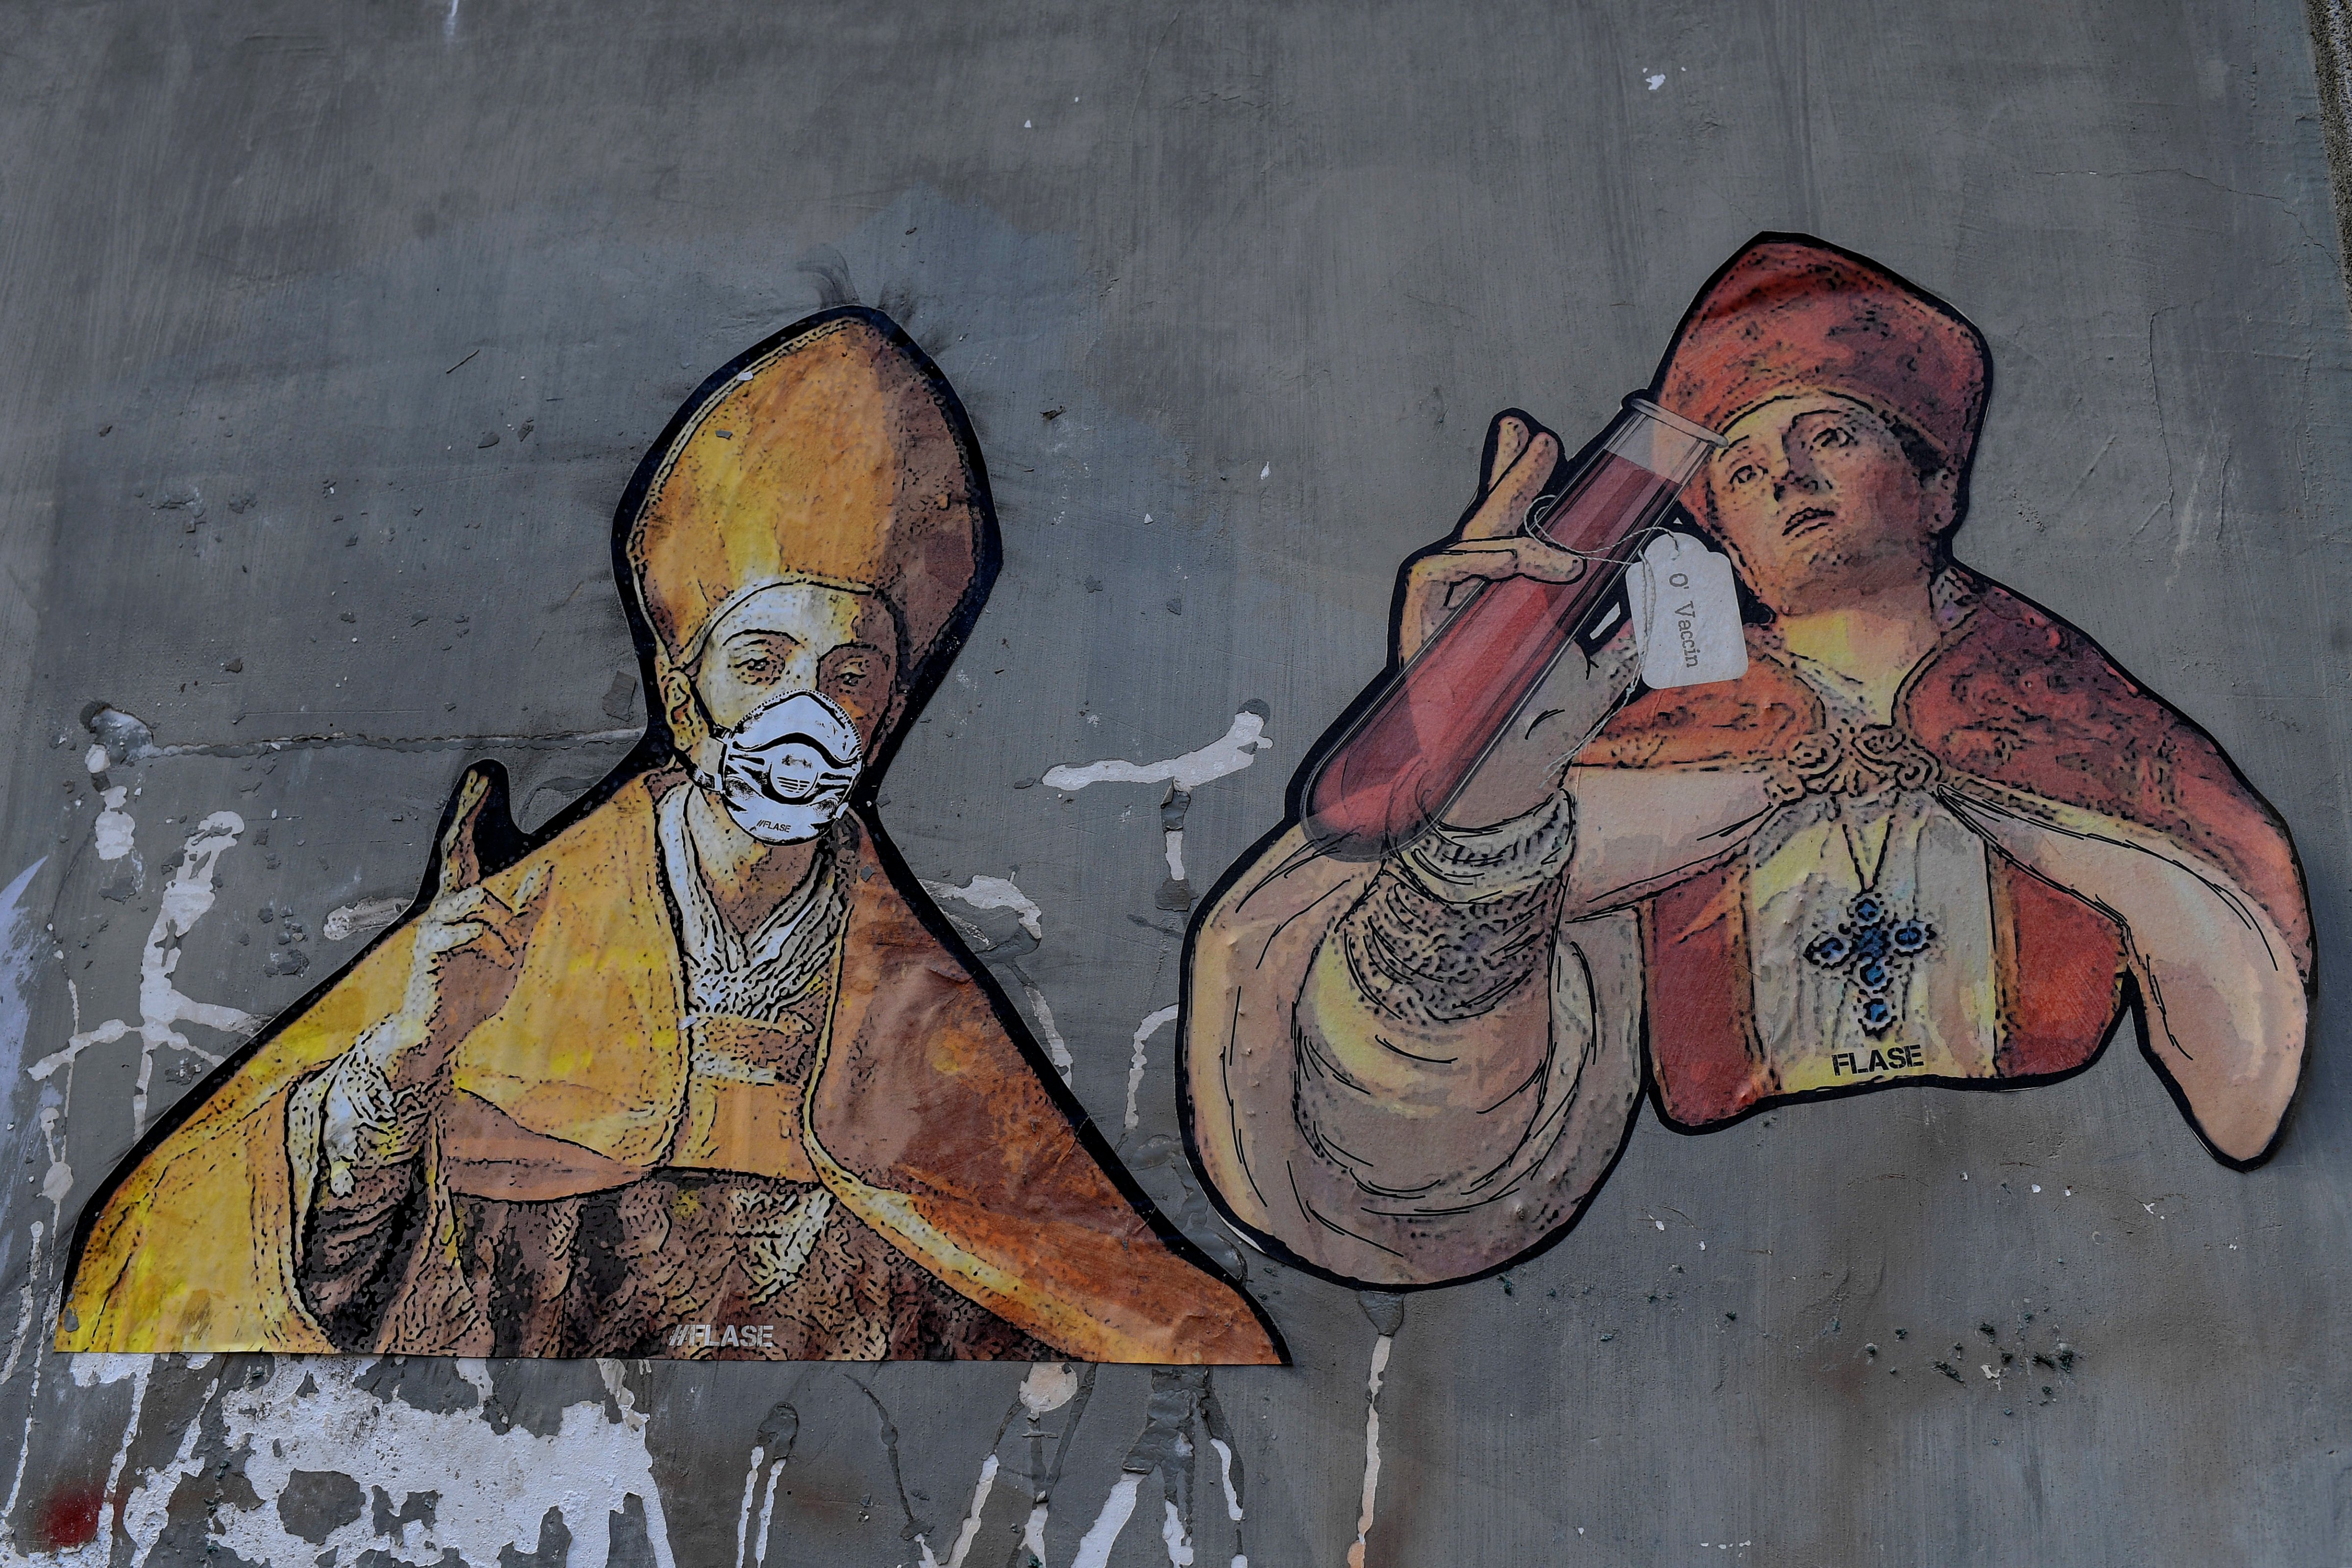 A mural depicting two figures of Saint Gennaro, patron of Naples, with a protective mask and an ampule with the label "The vaccine" written in Napolitan on a wall in the city's downtown, on May 11, 2020. (Salvatore Laporta—KONTROLAB/LightRocket via Getty Images)